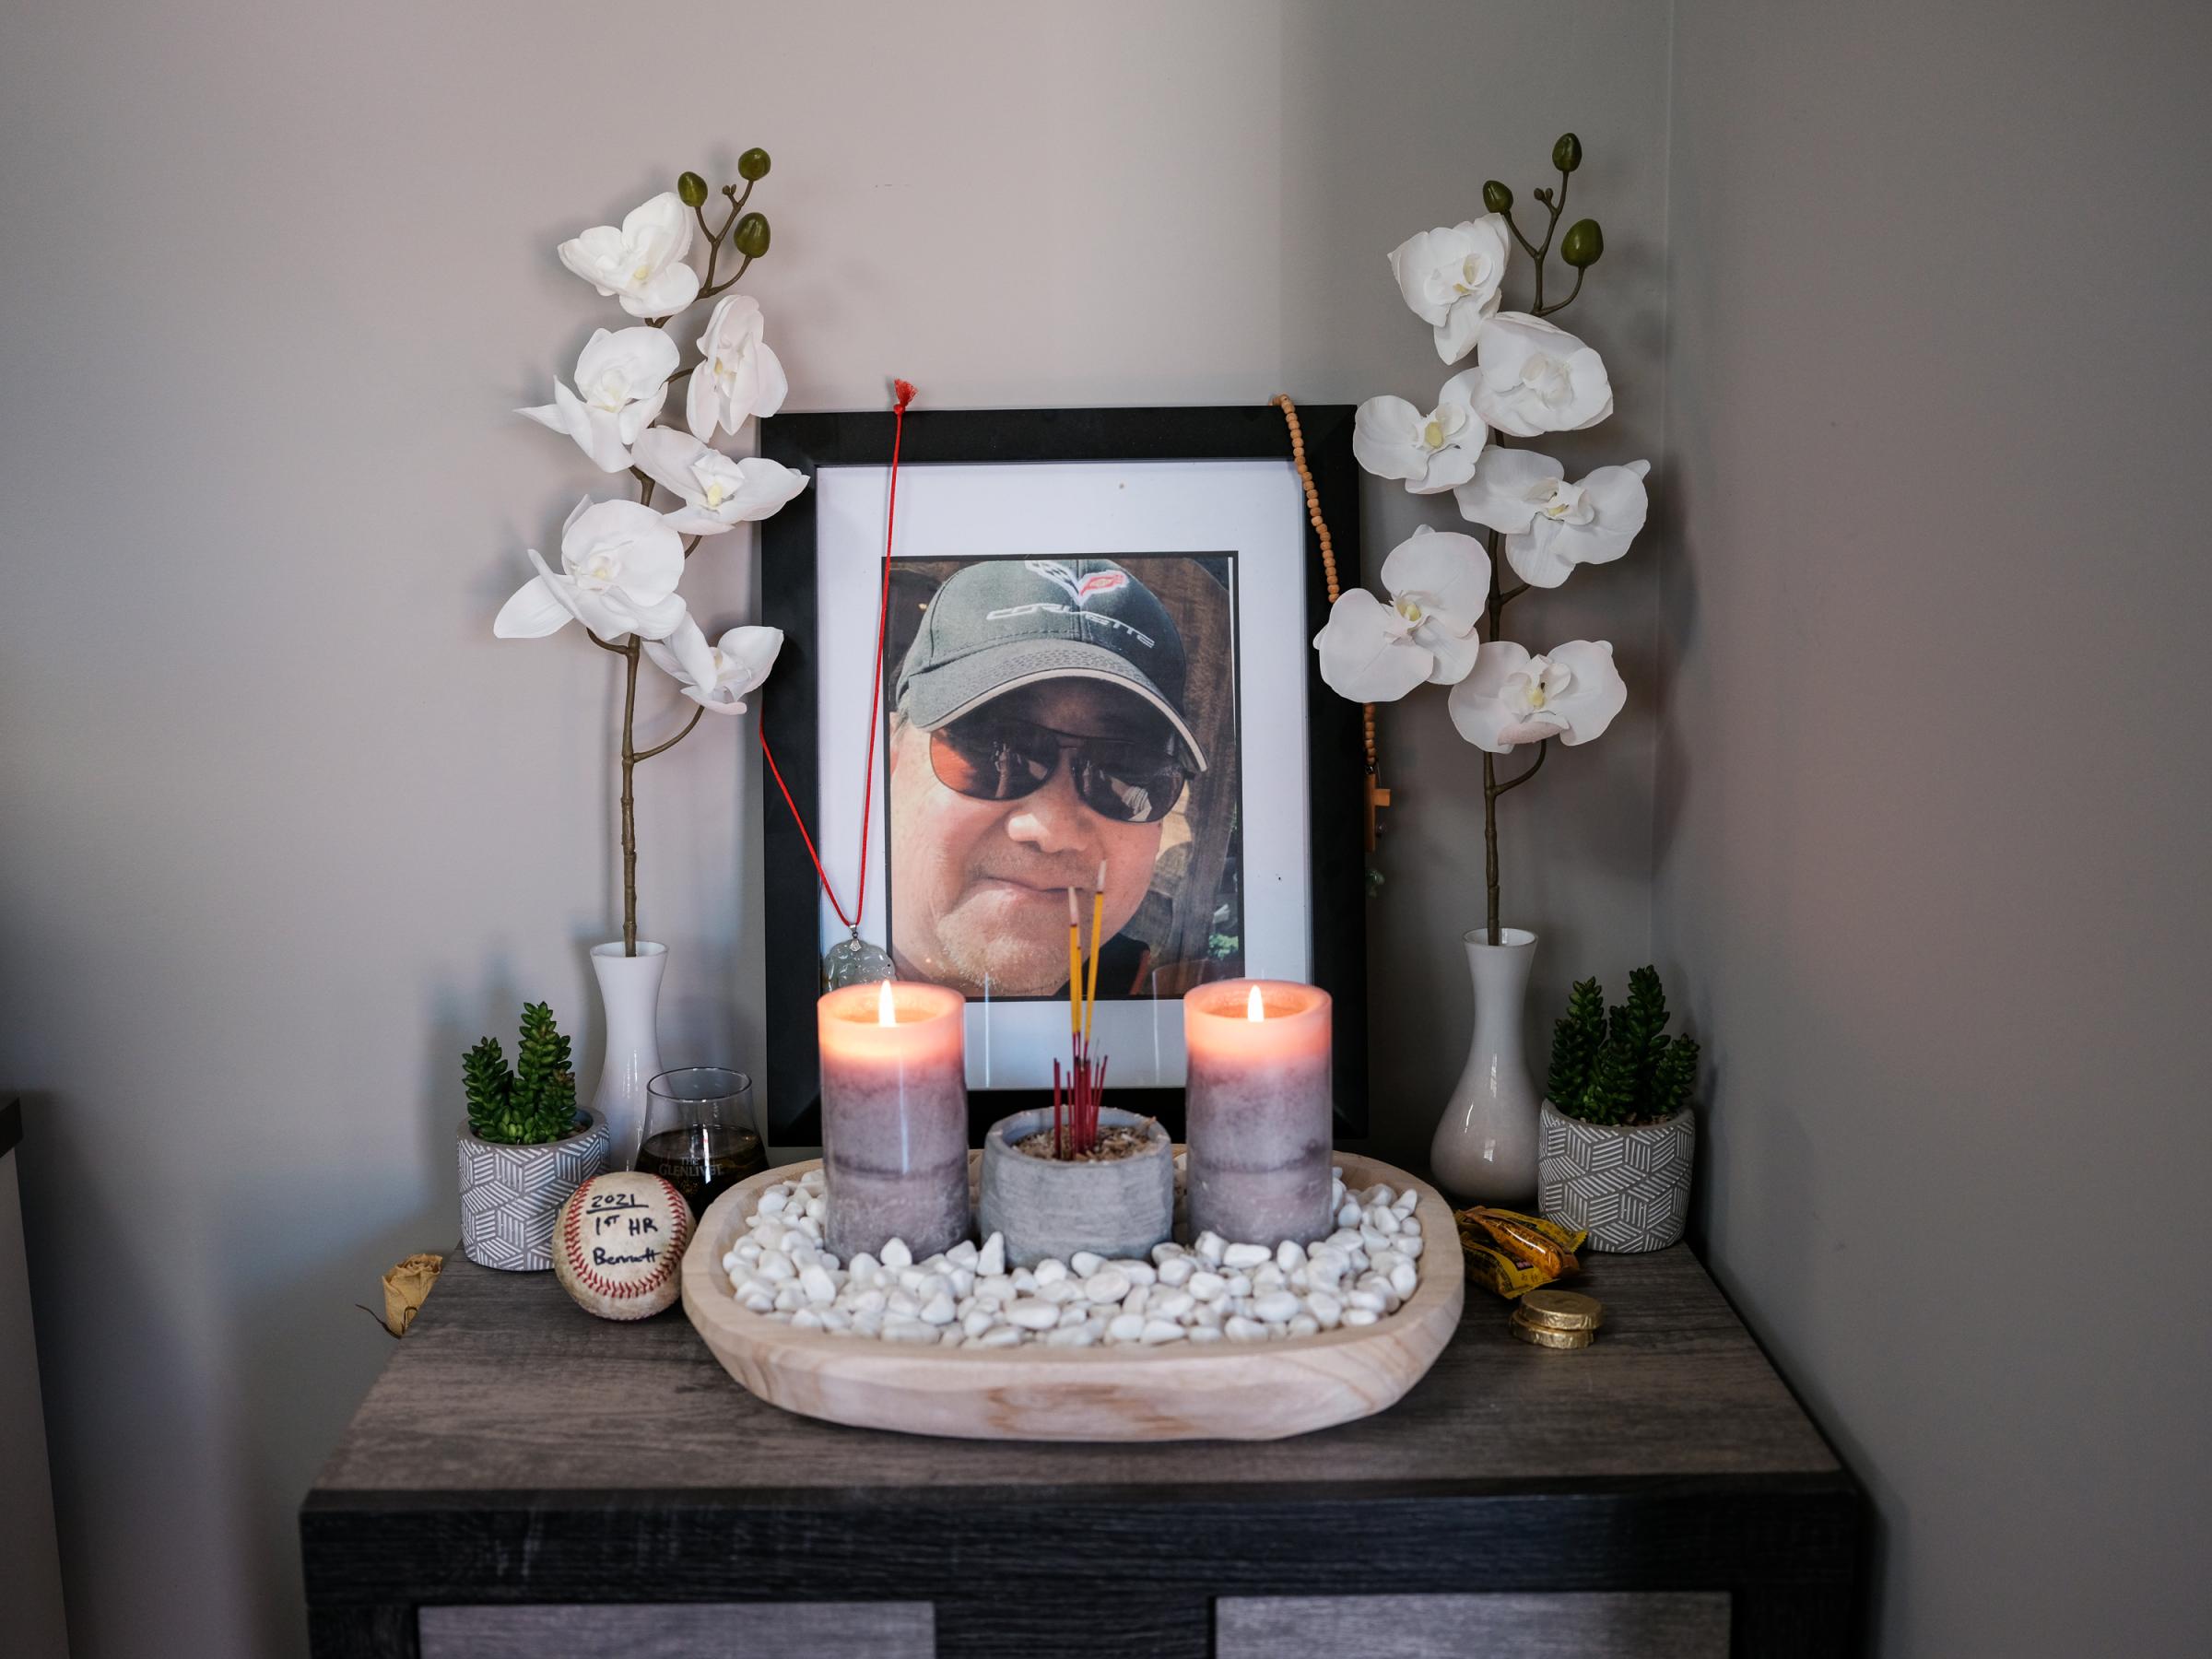 OMAHA, NE - MARCH 19, 2022: A shrine dedicated to Ming Wang is displayed in Ping Wang&#39;s home in Omaha, Nebraska on March 19, 2022. (Photo by Arin Yoon for The Washington Post) Papillion United States